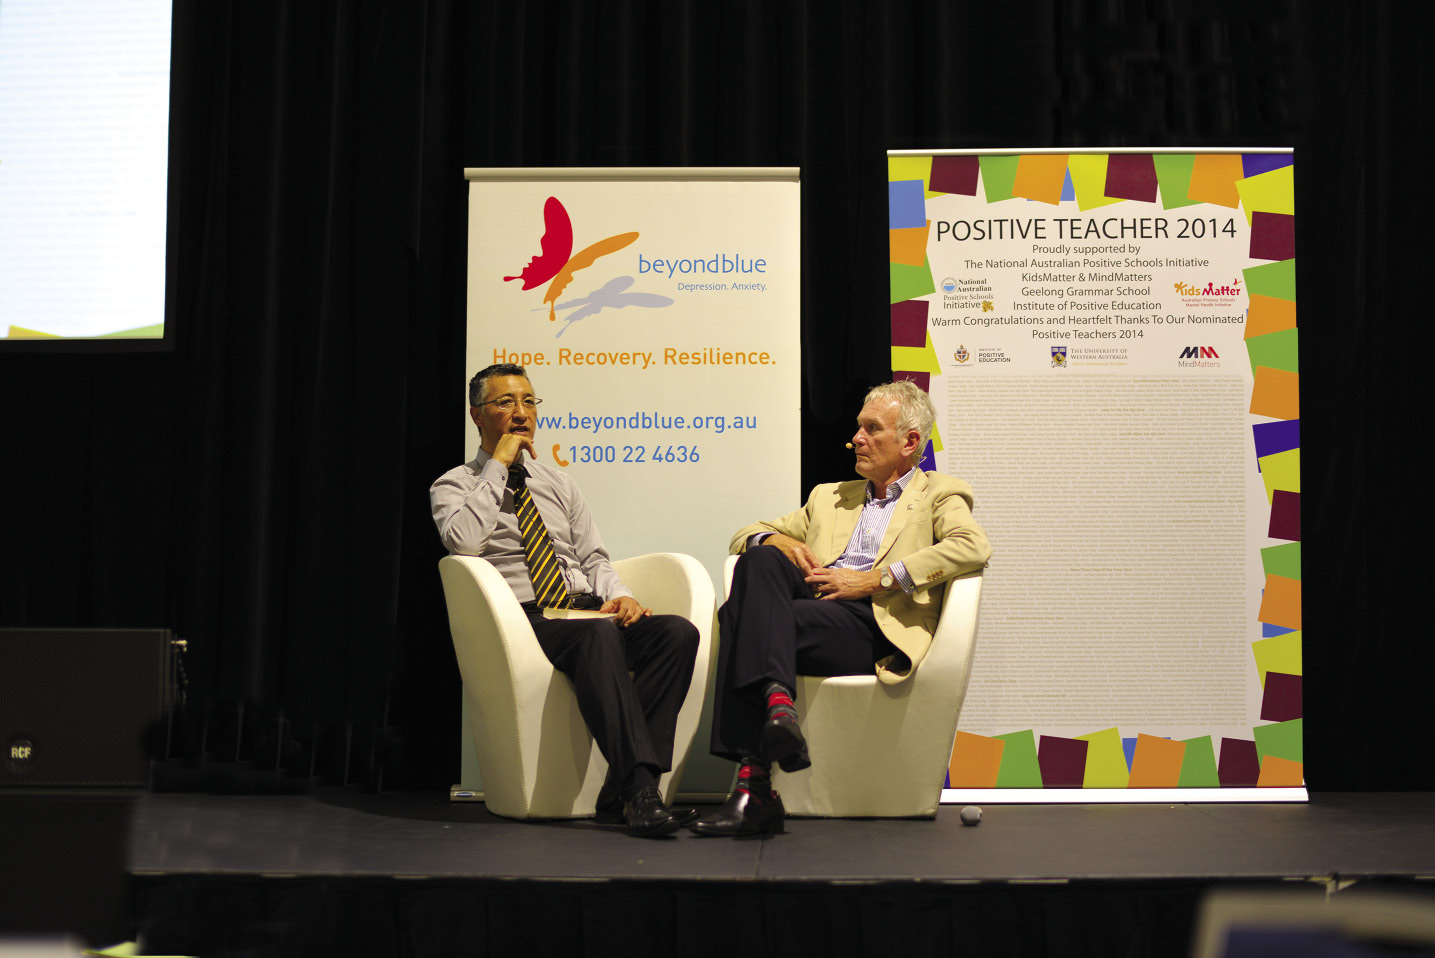 Andrew Fiu with Peter Thompson having a discussion on stage at a Positive Schools Conference, Sydney